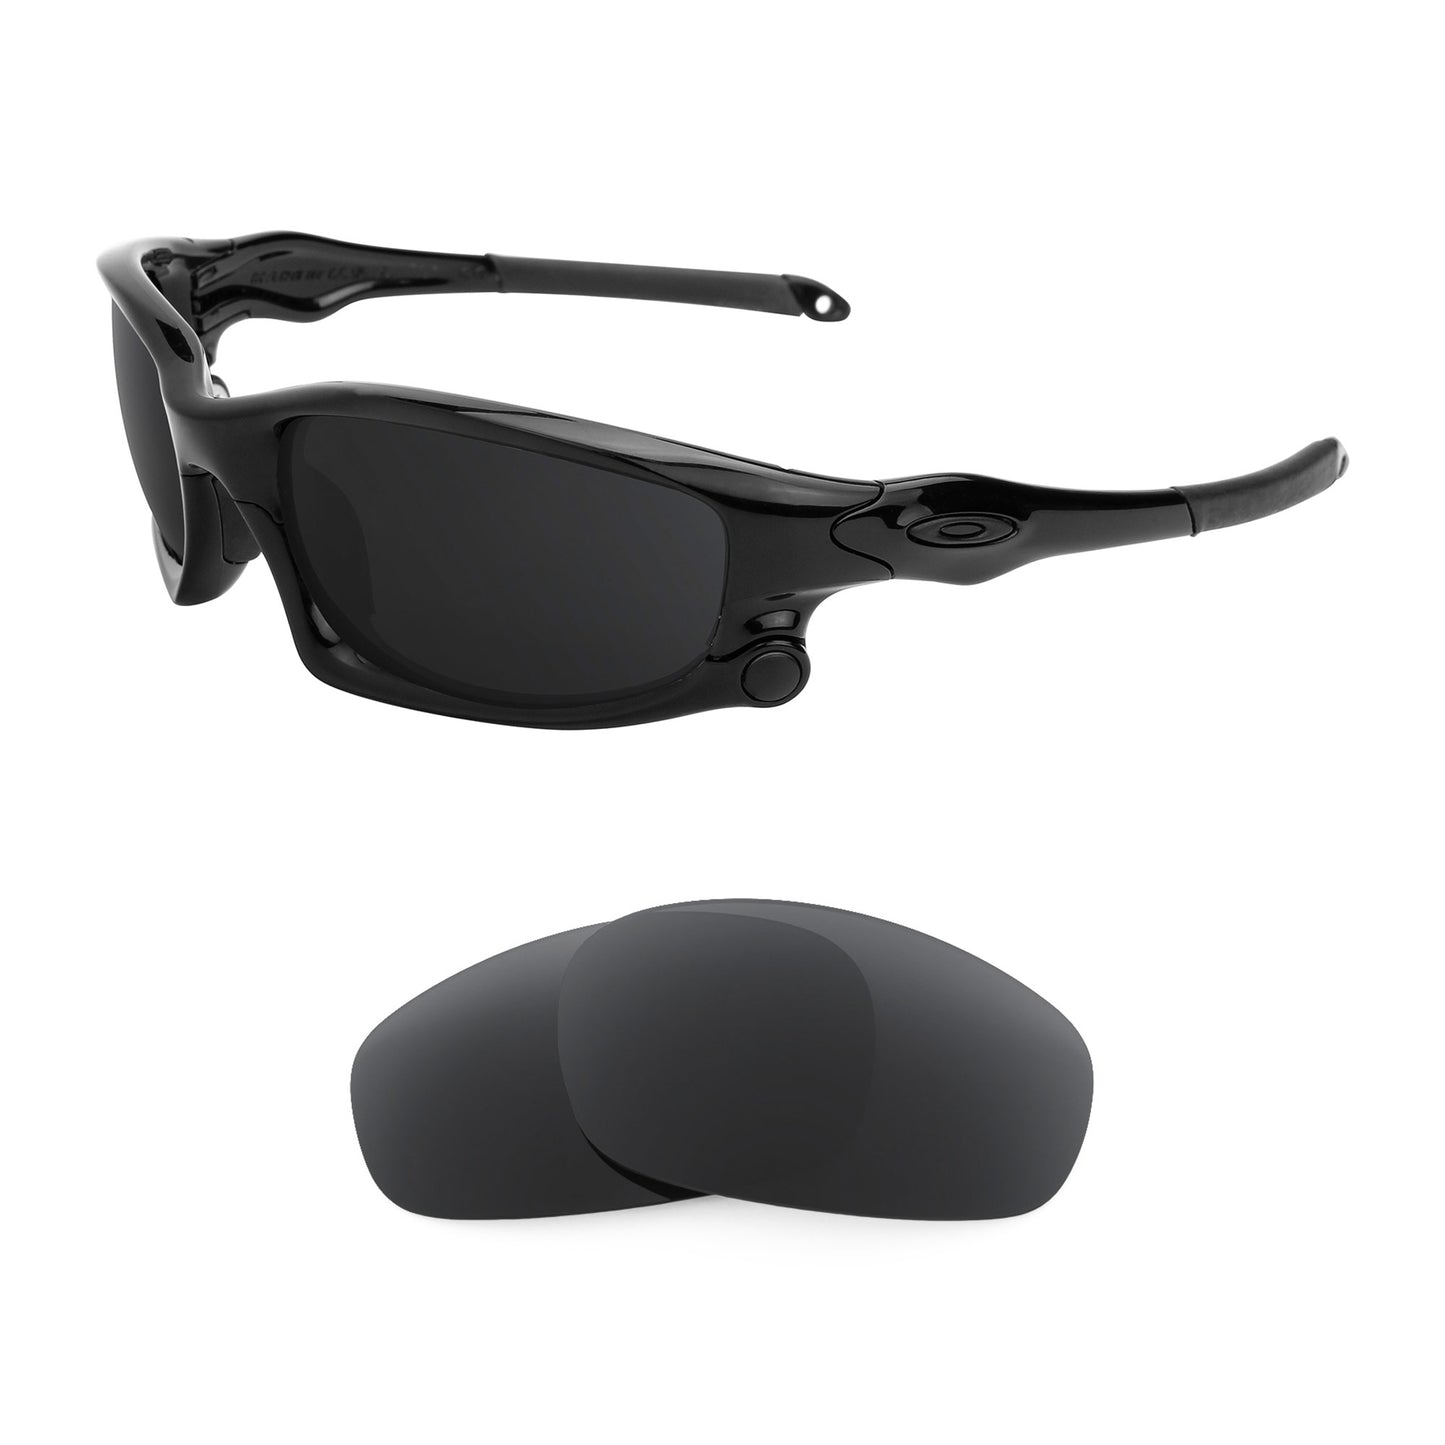 Oakley Wind Jacket sunglasses with replacement lenses